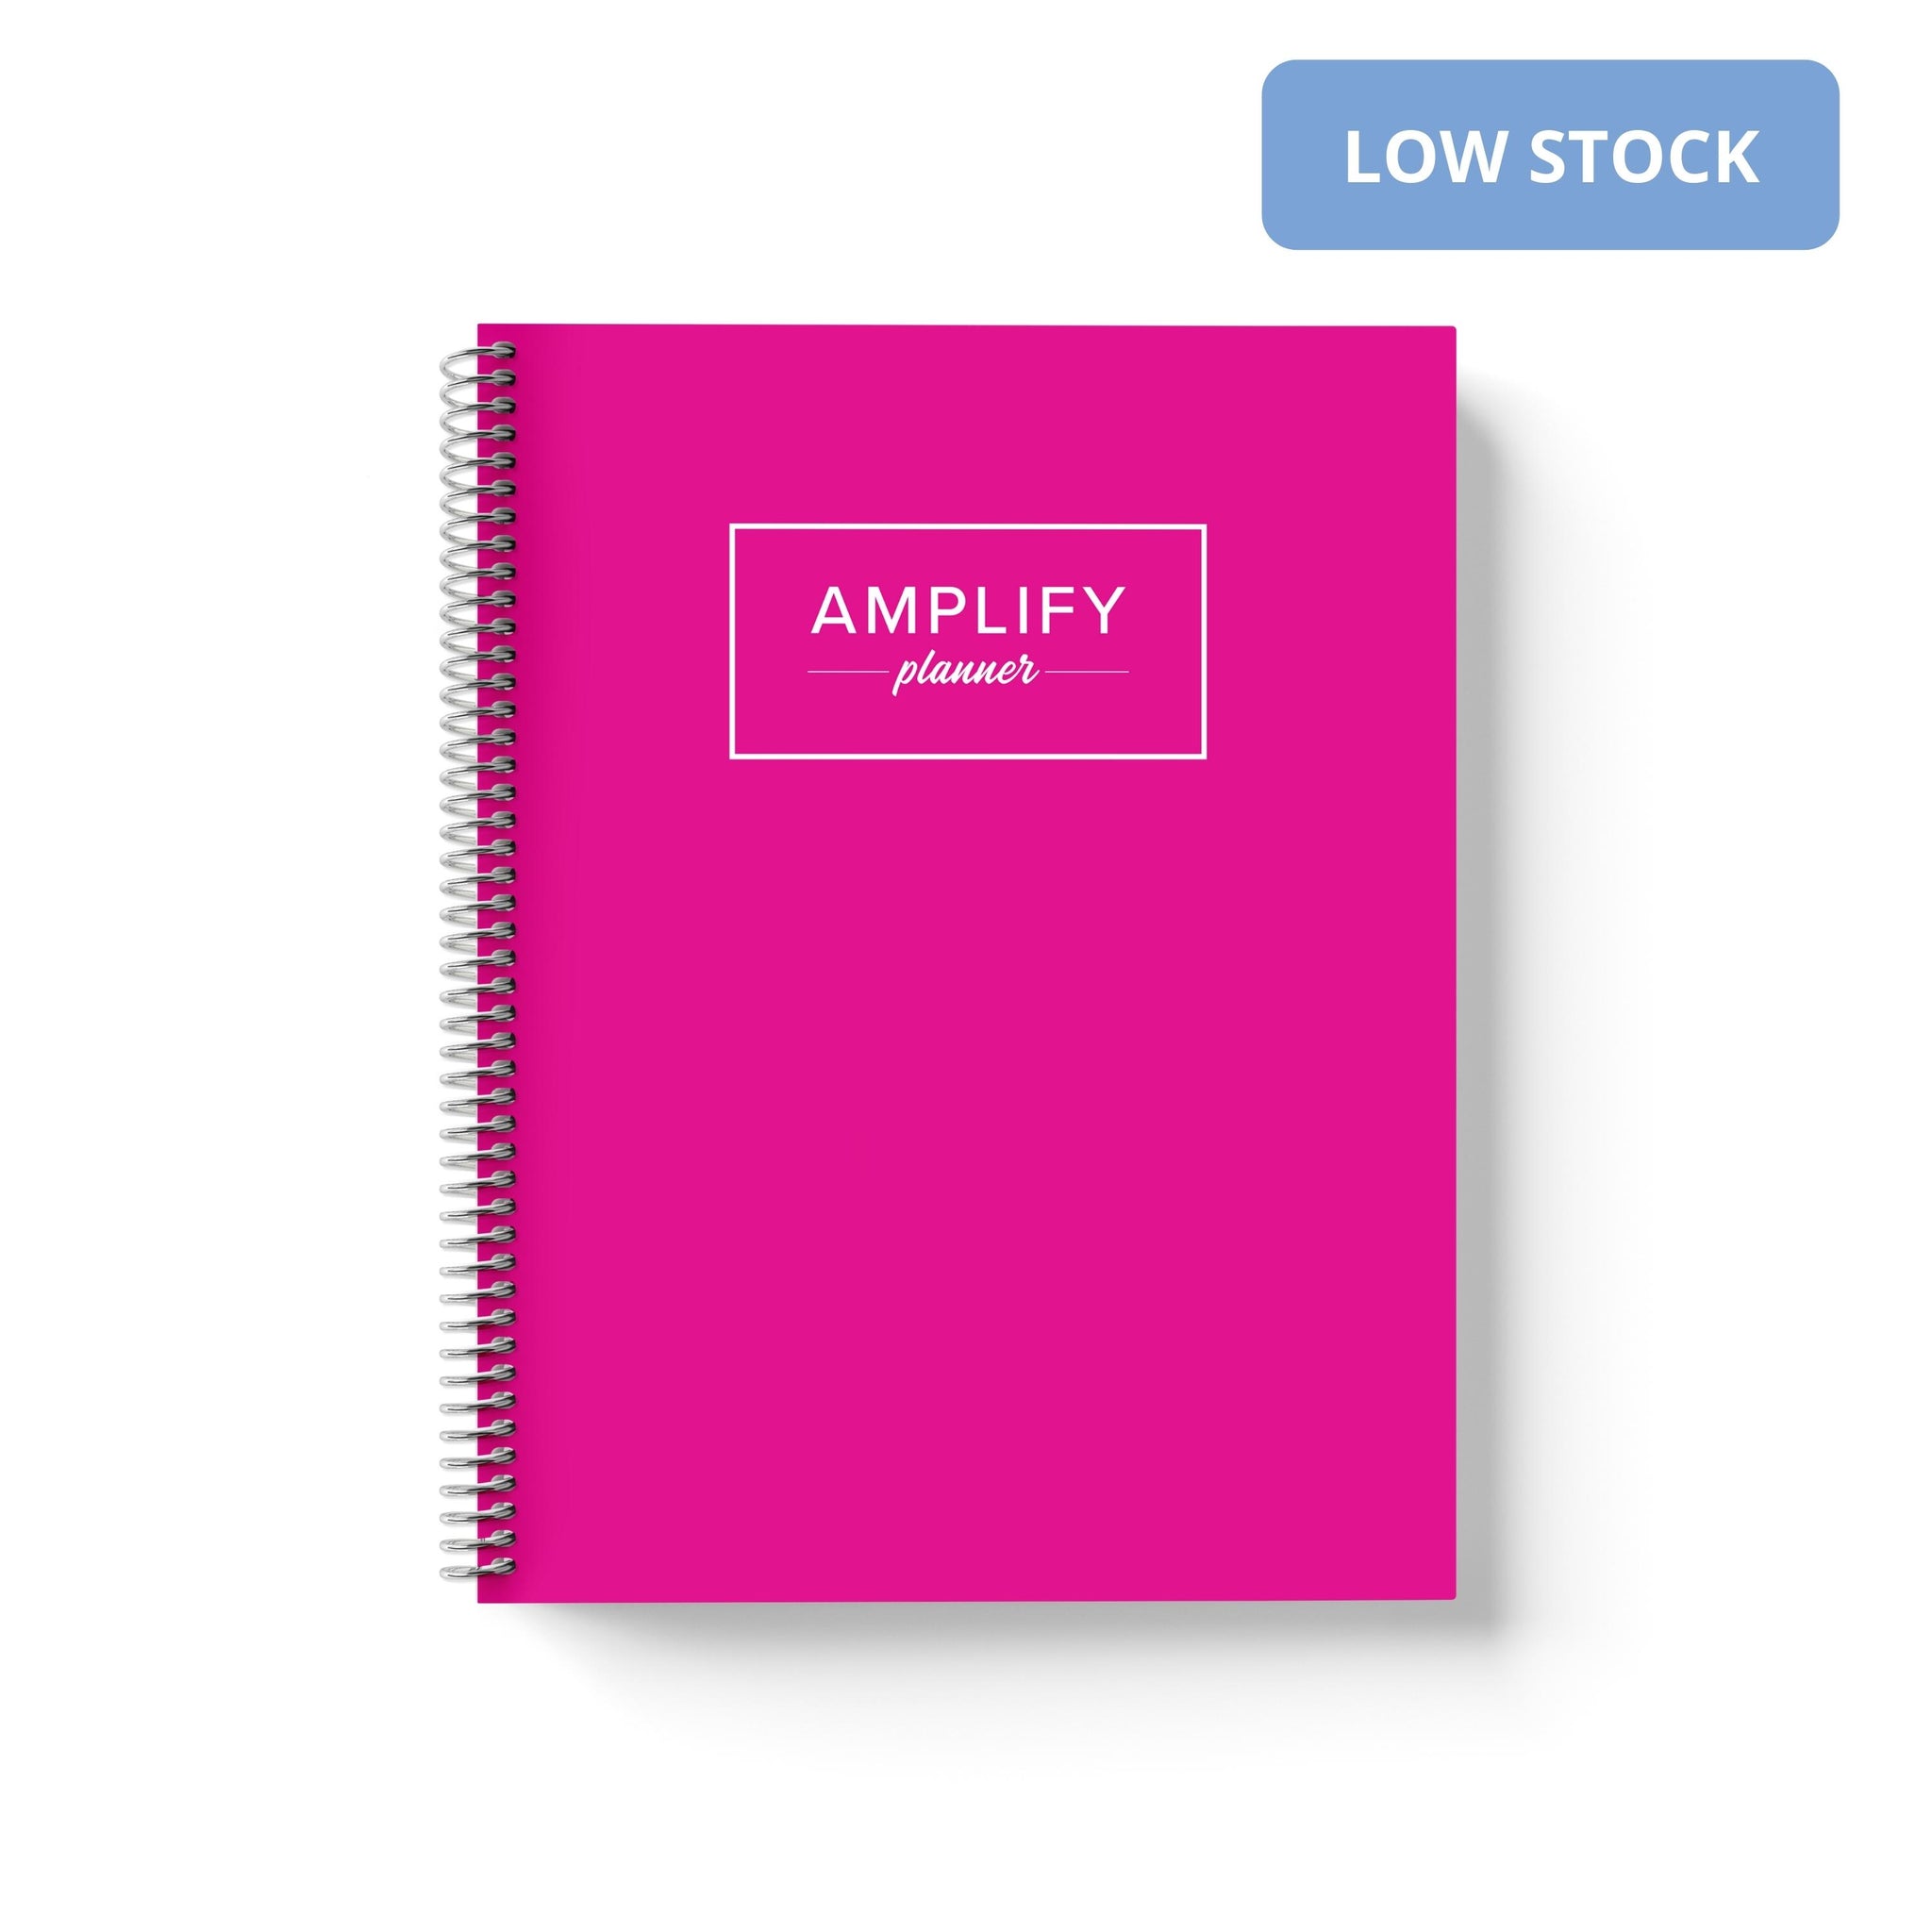 all-yearly-planners-amplify-planner